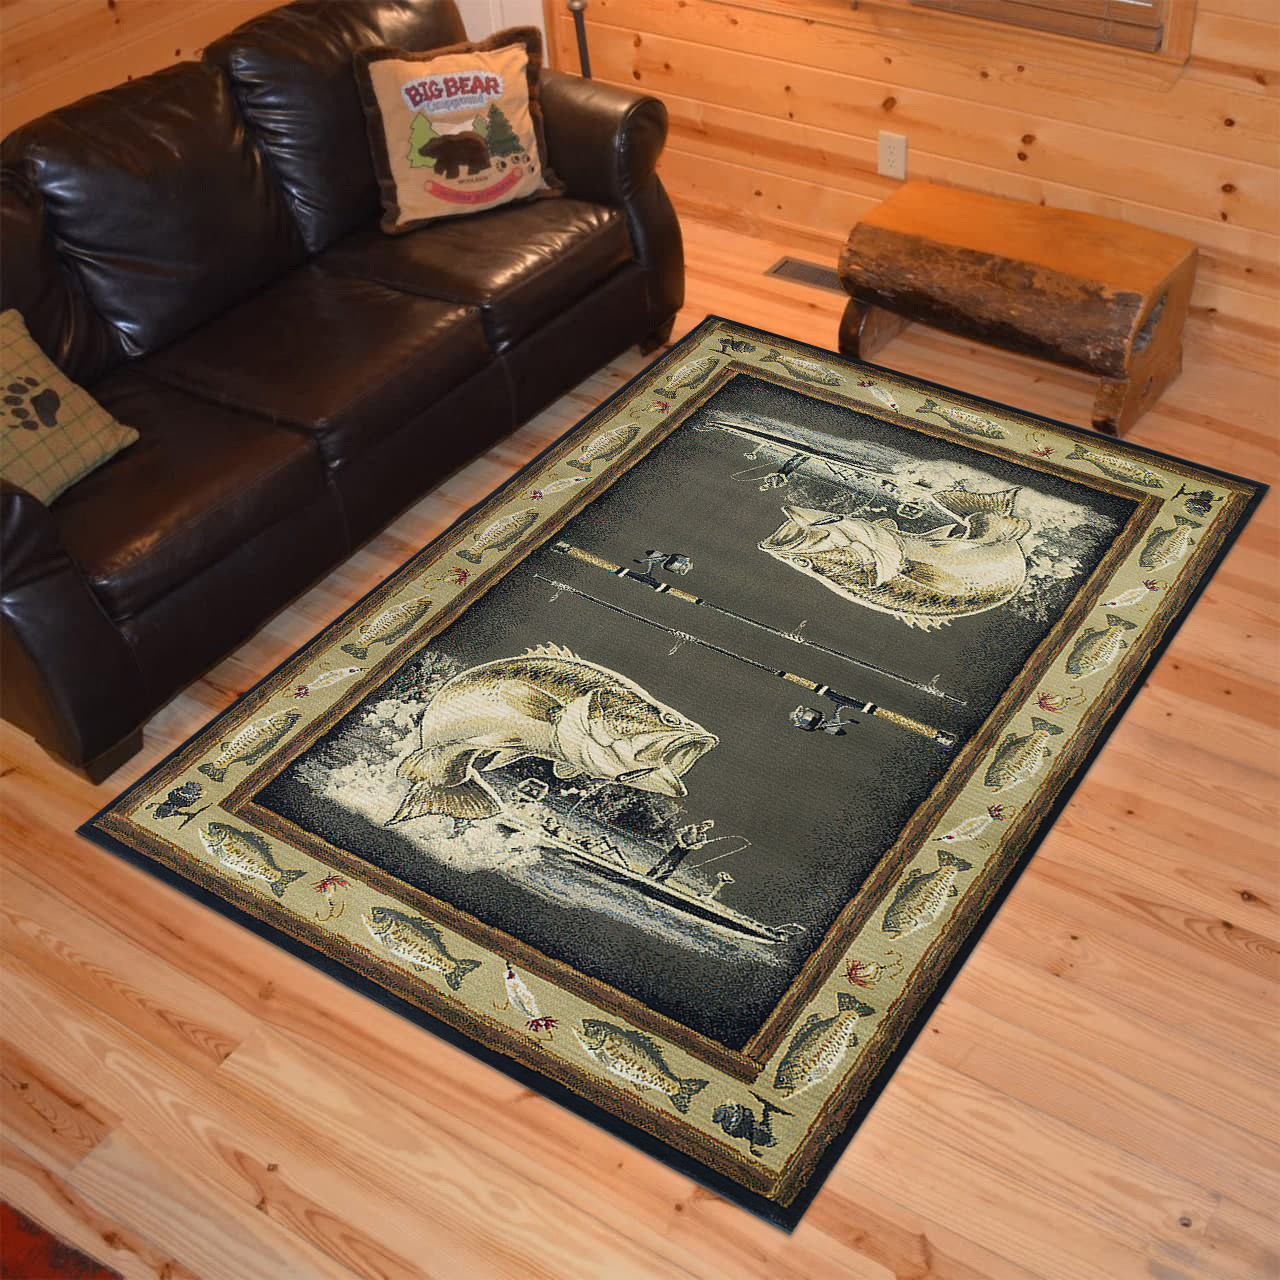 Rugs in Living Room and Bedroom - Fishing rug carpet rustic style rug living room rug home decor